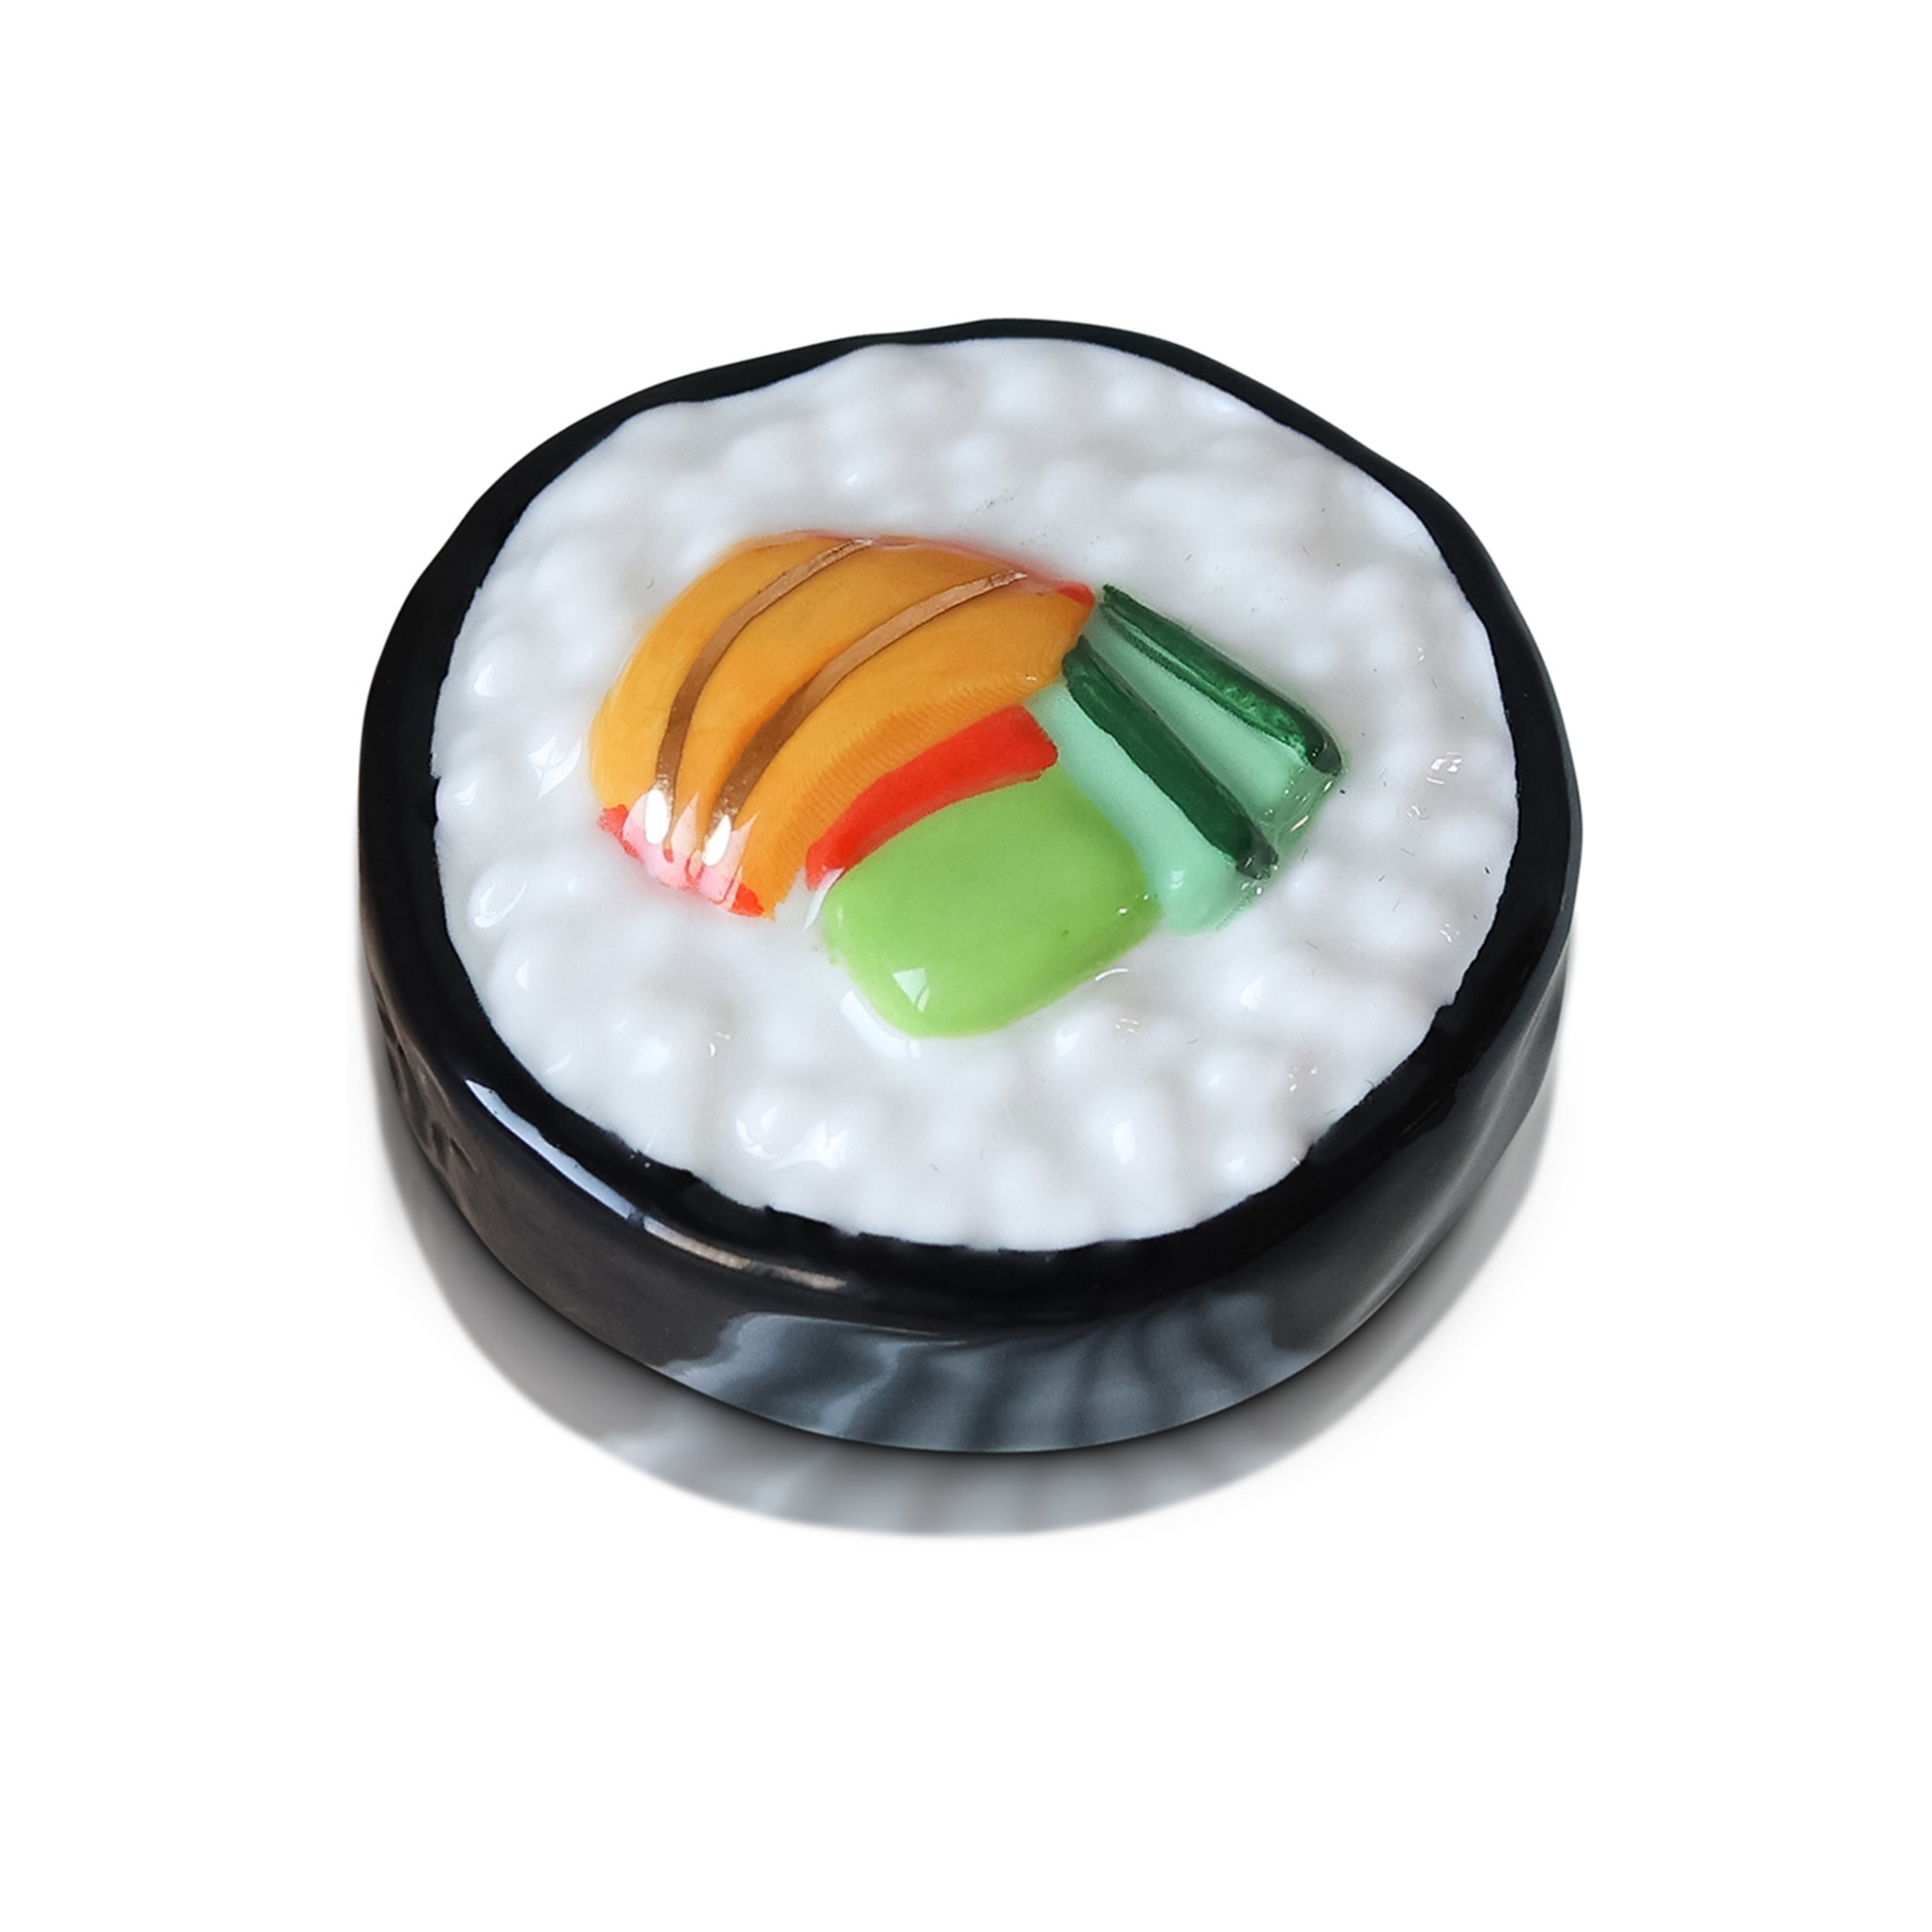 nora fleming on a roll mini (sushi roll) A294